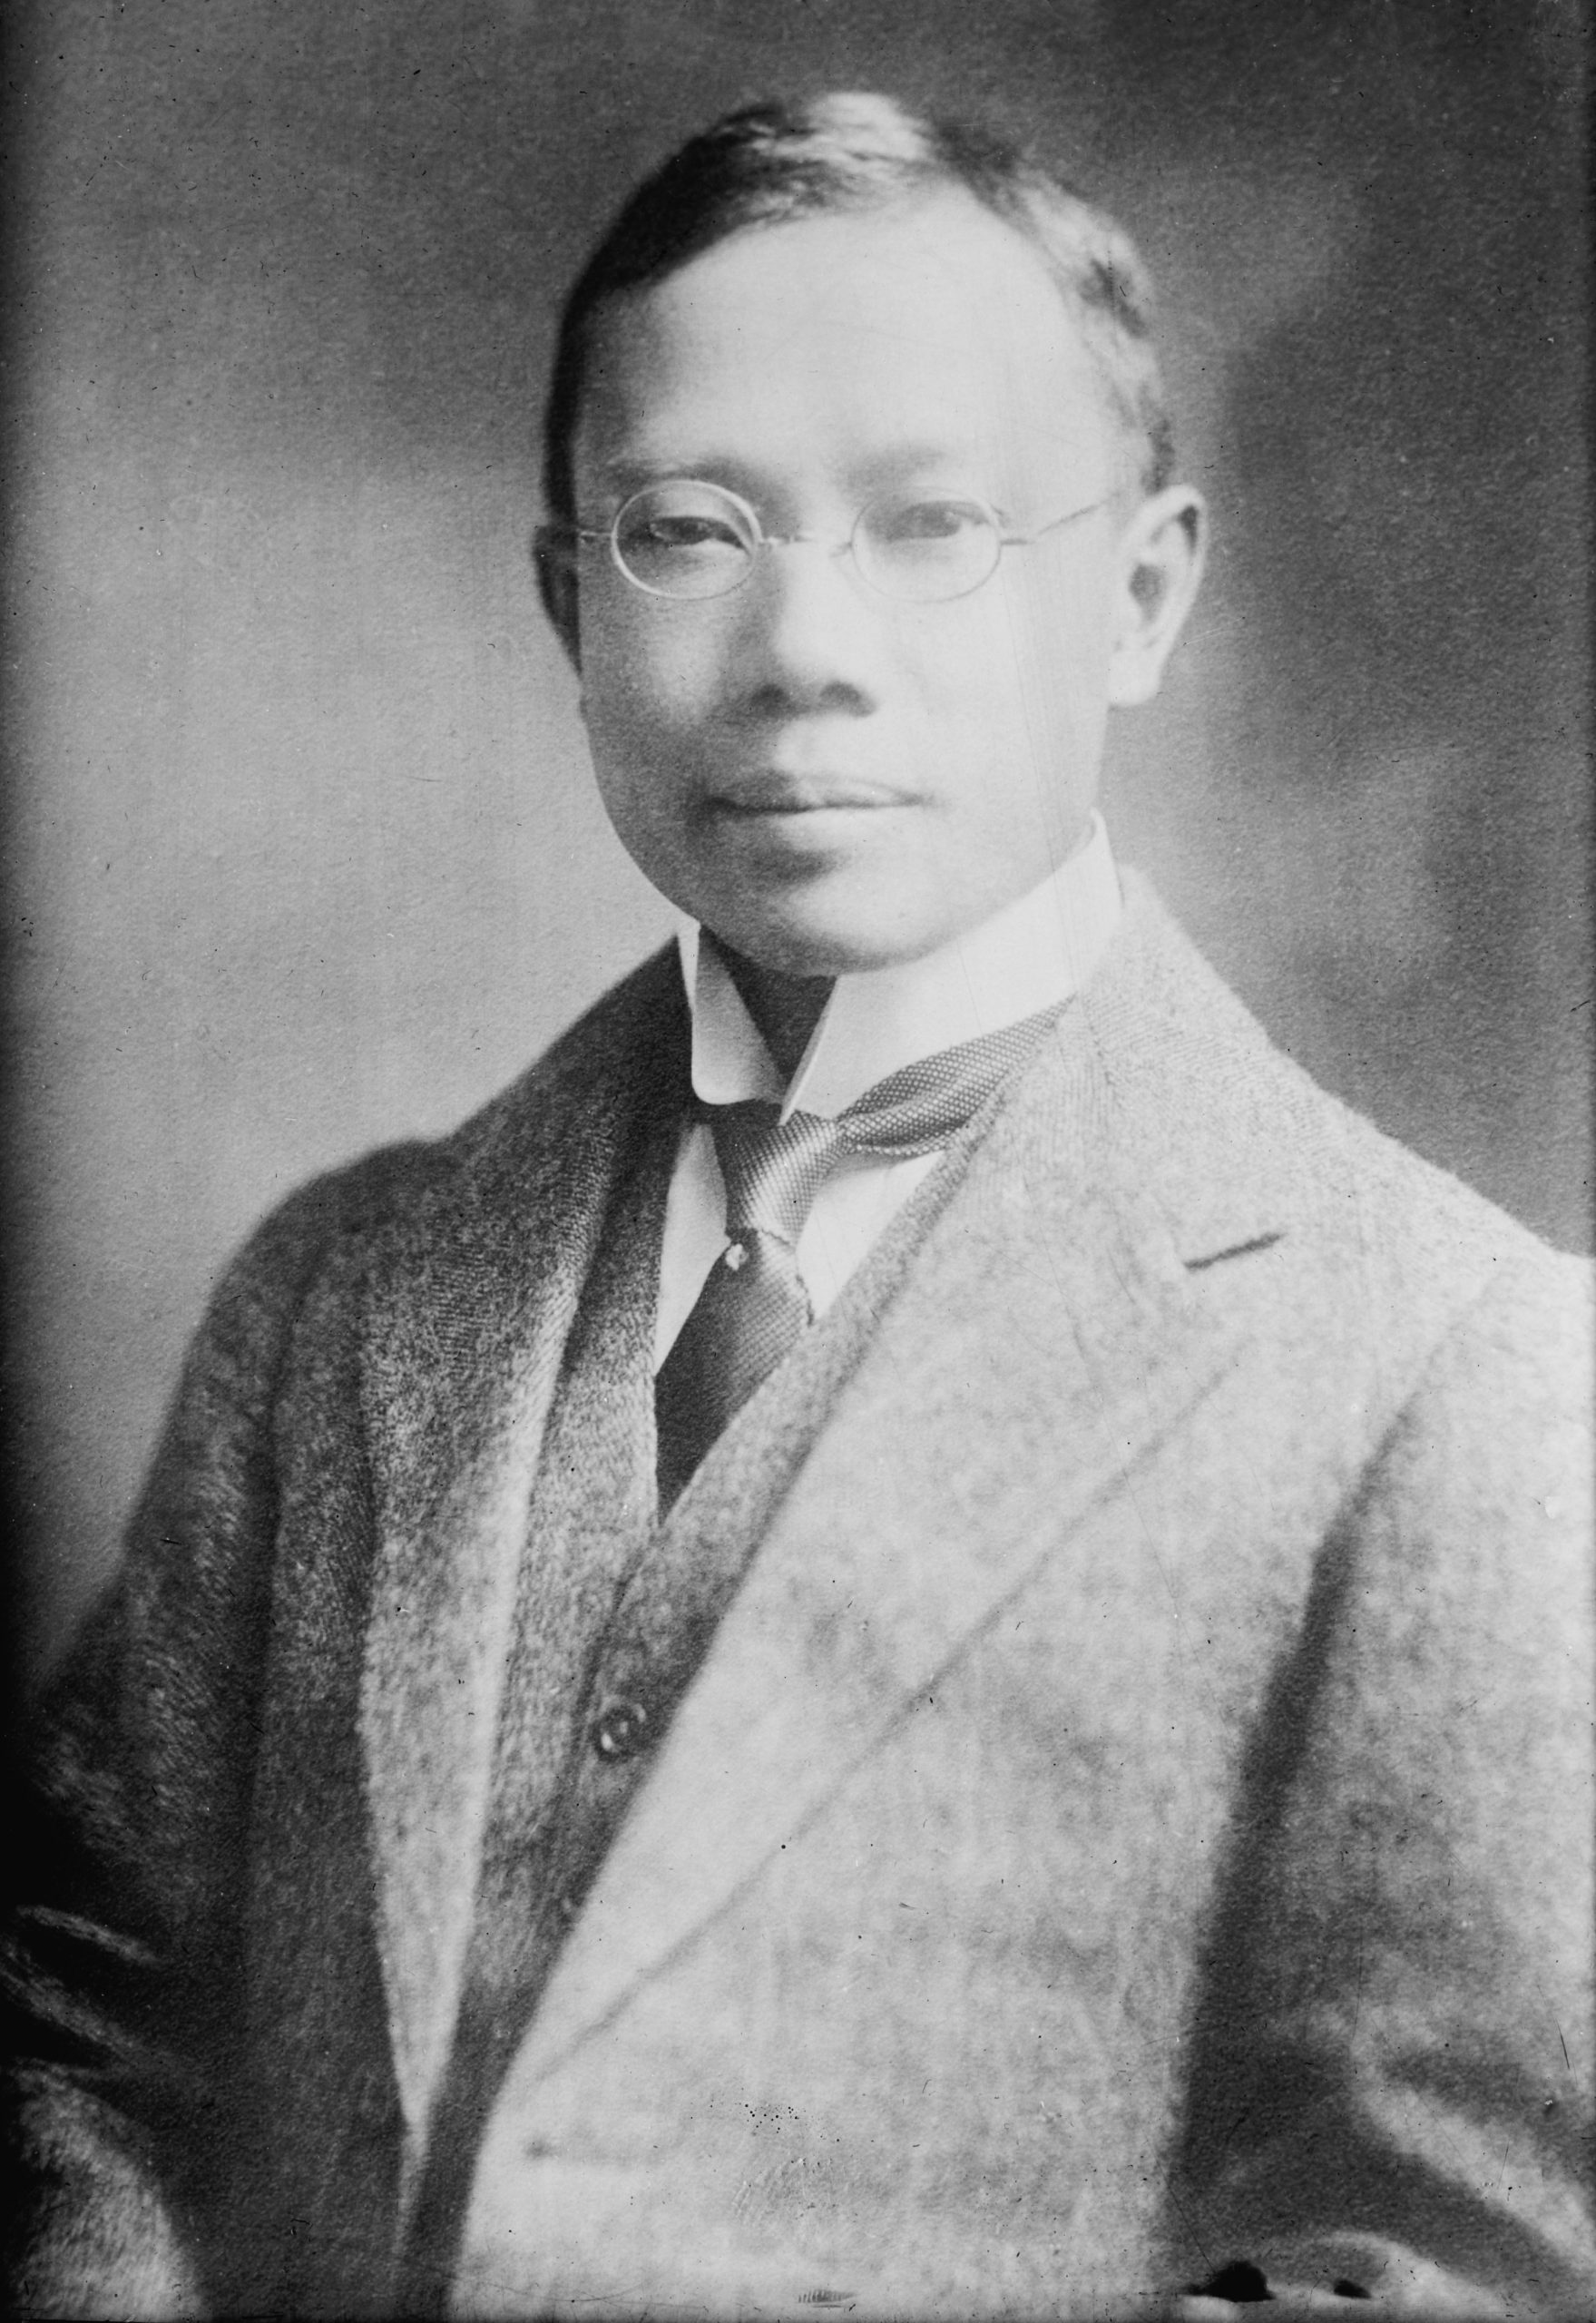 Black and white photograph of Dr. Wu Lien teh